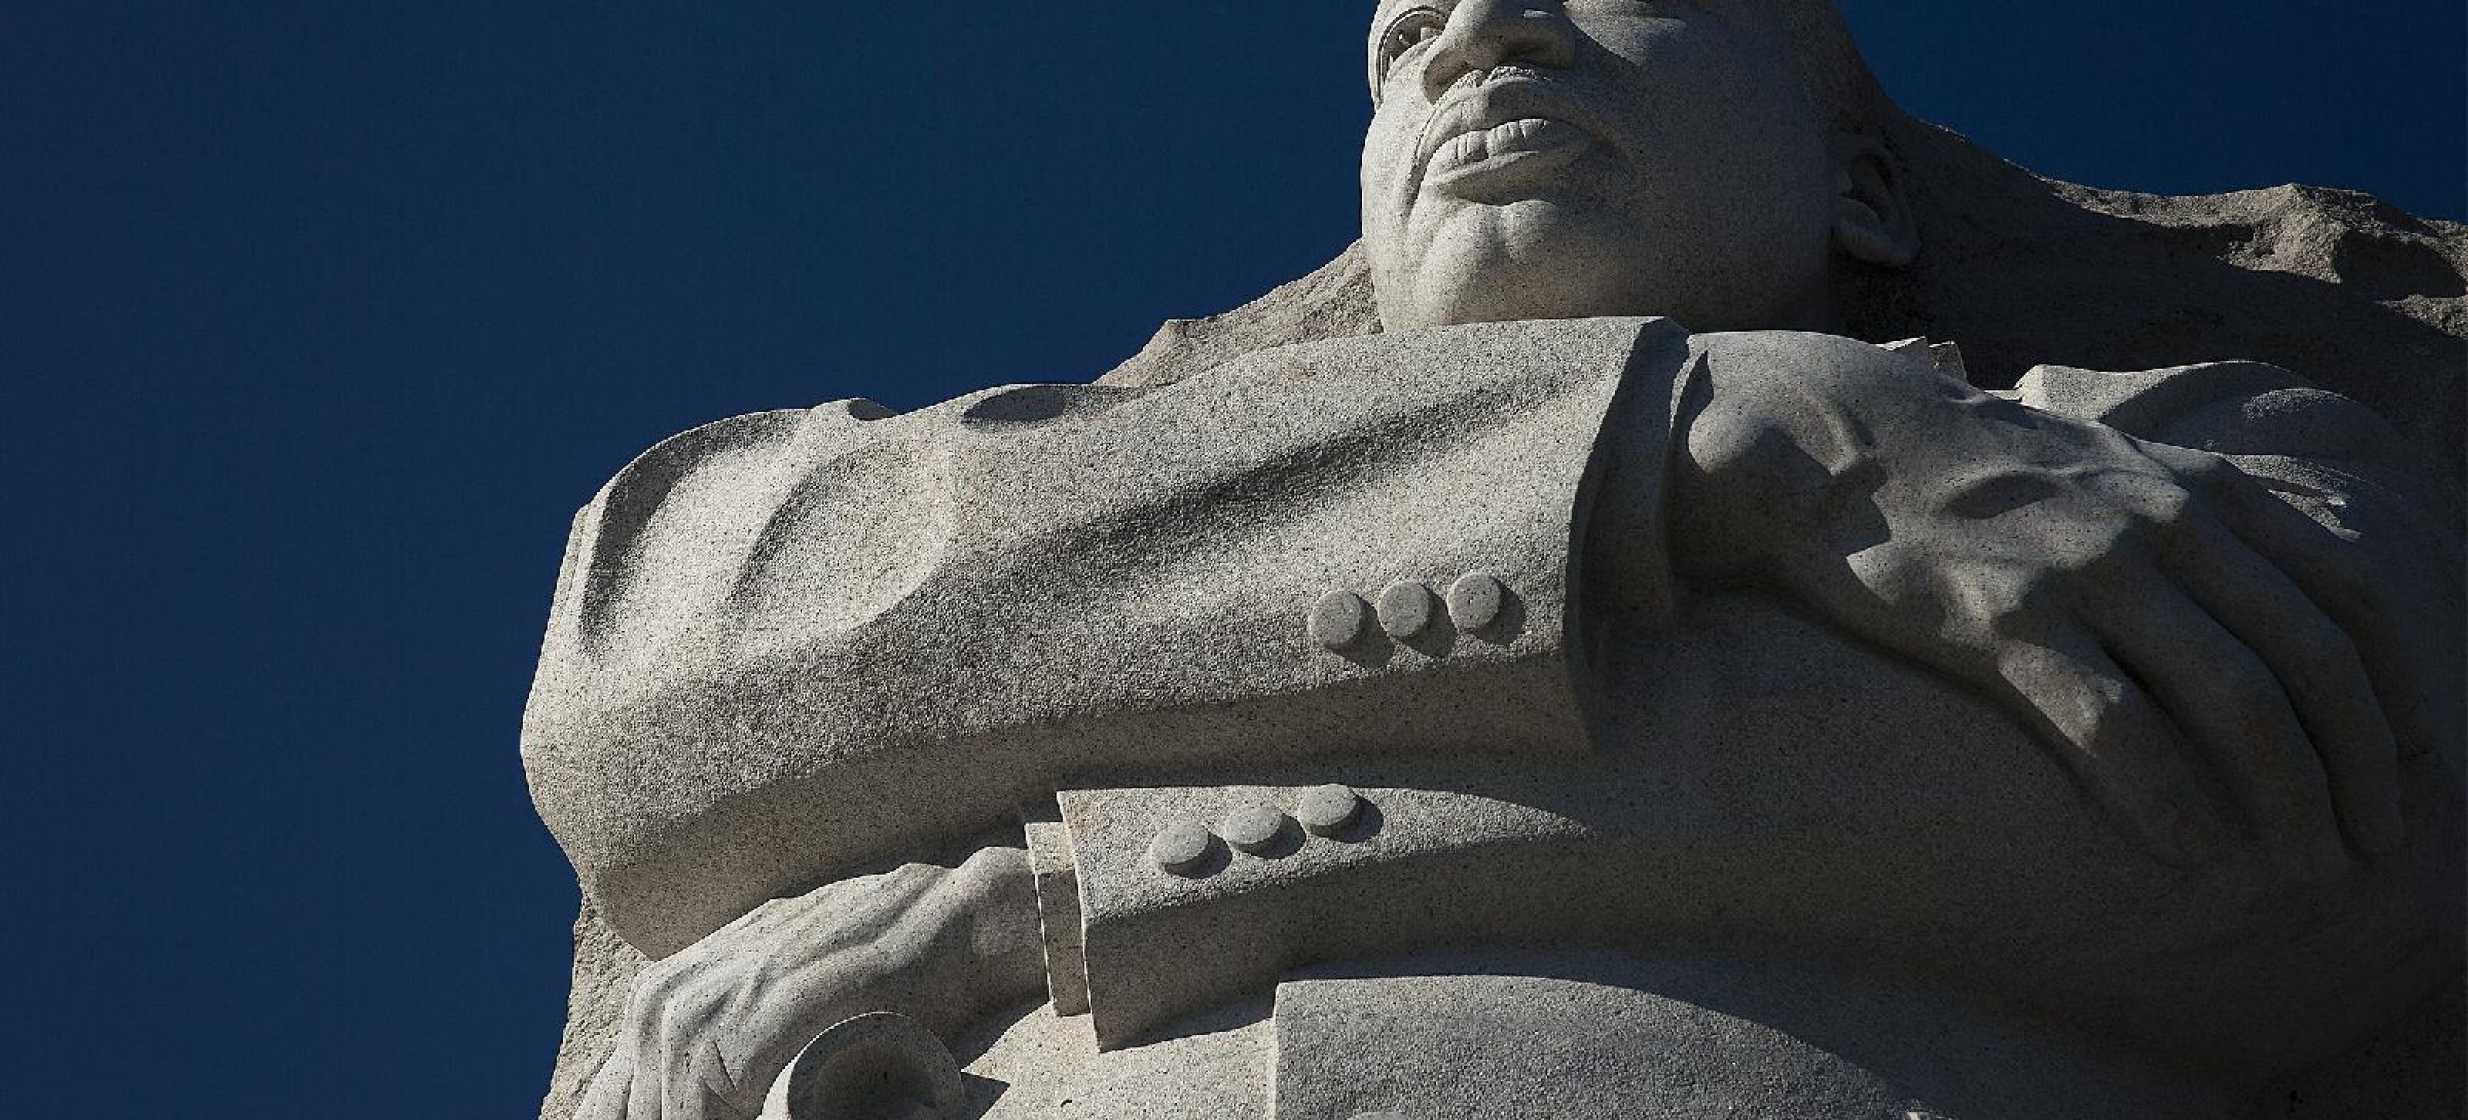 The Martin Luther King Jr. Memorial in Washington is seen in this illustration photo.